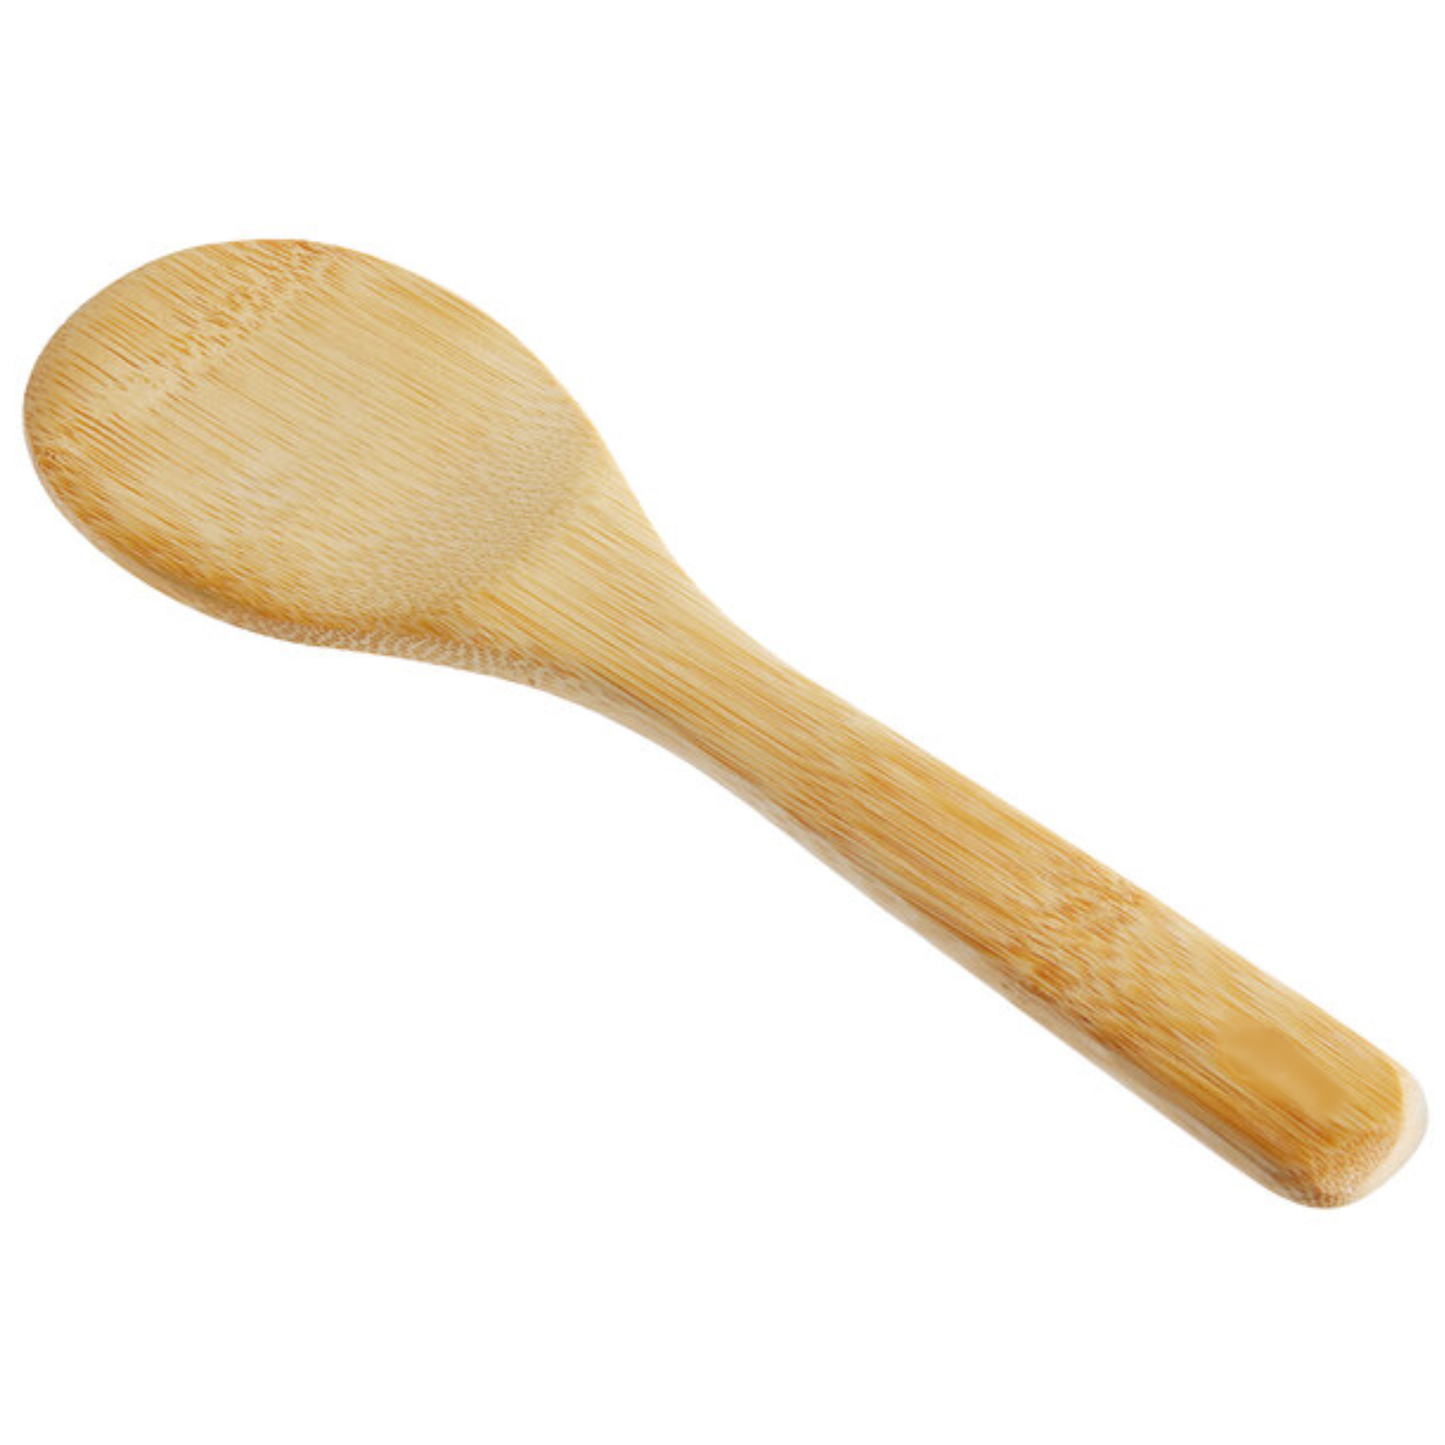 8" Bamboo Rice Spoon (Set of 3)